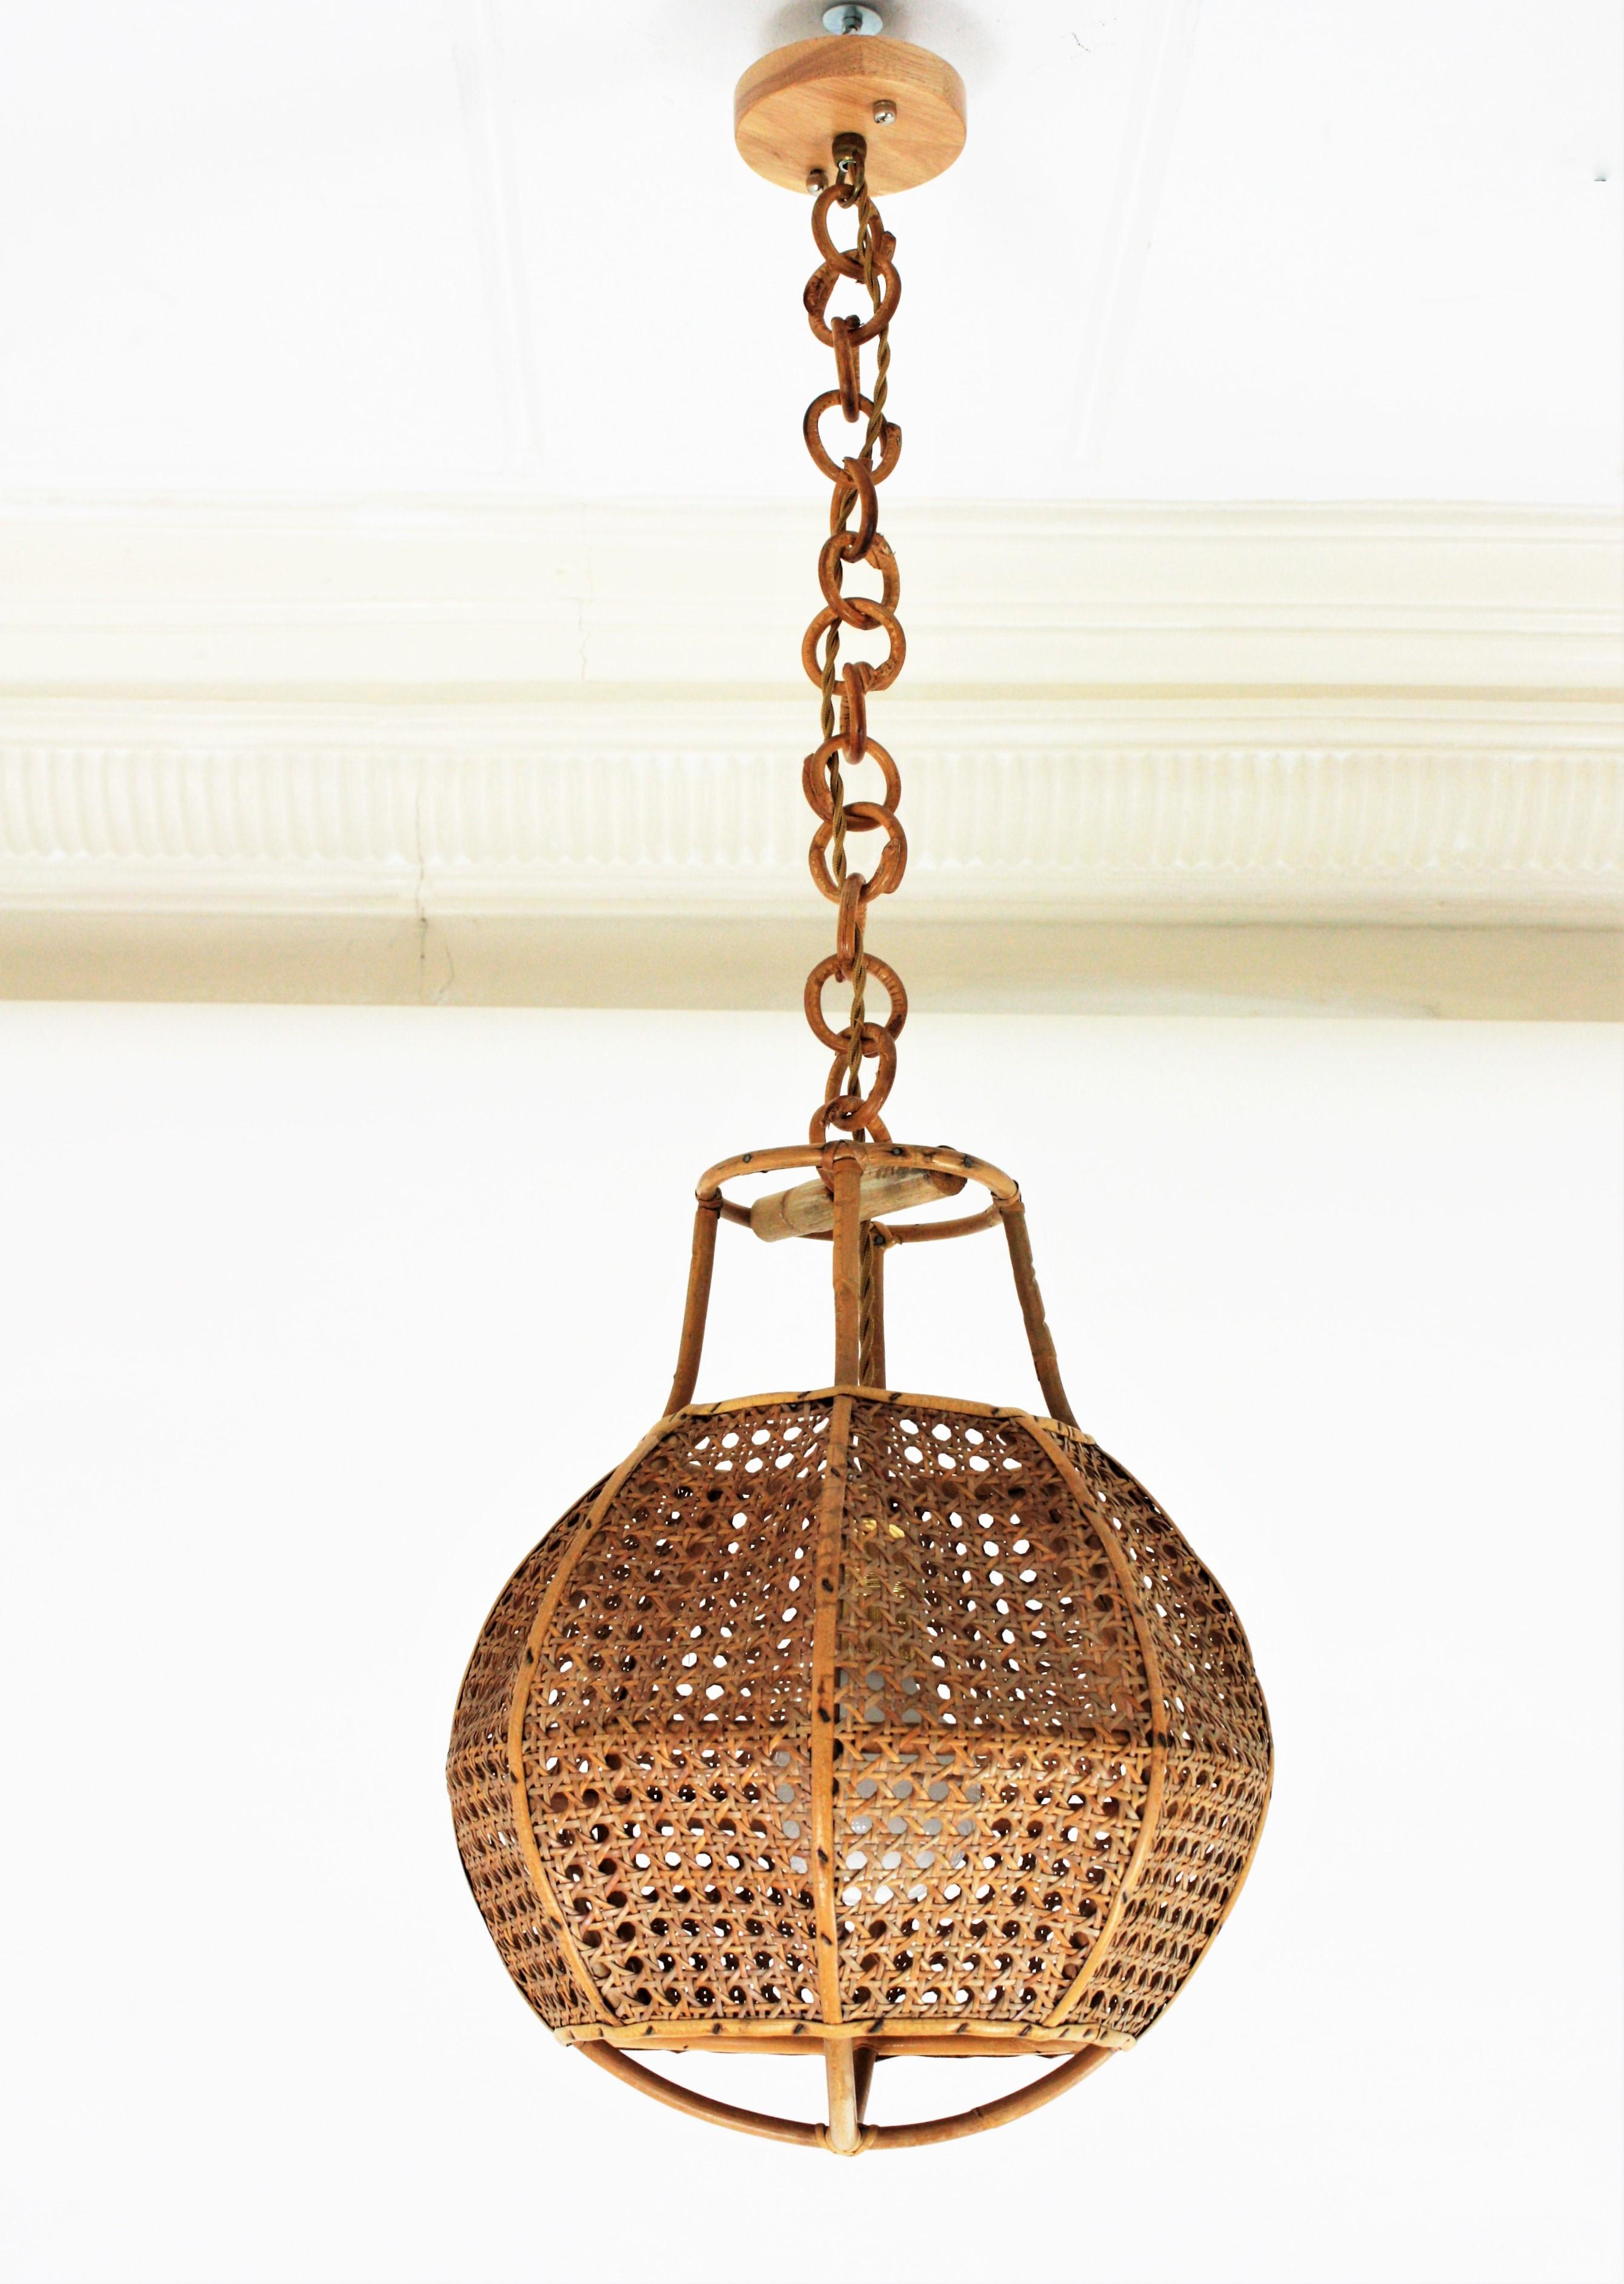 Mid-Century Modern woven wicker wire and rattan globe shaped lantern or pendant ceiling lamp, Italy, 1950s. 
The woven wicker spherical shade of this lamp is accented by rattan details. It hangs from a chain with round rattan links that can be cut